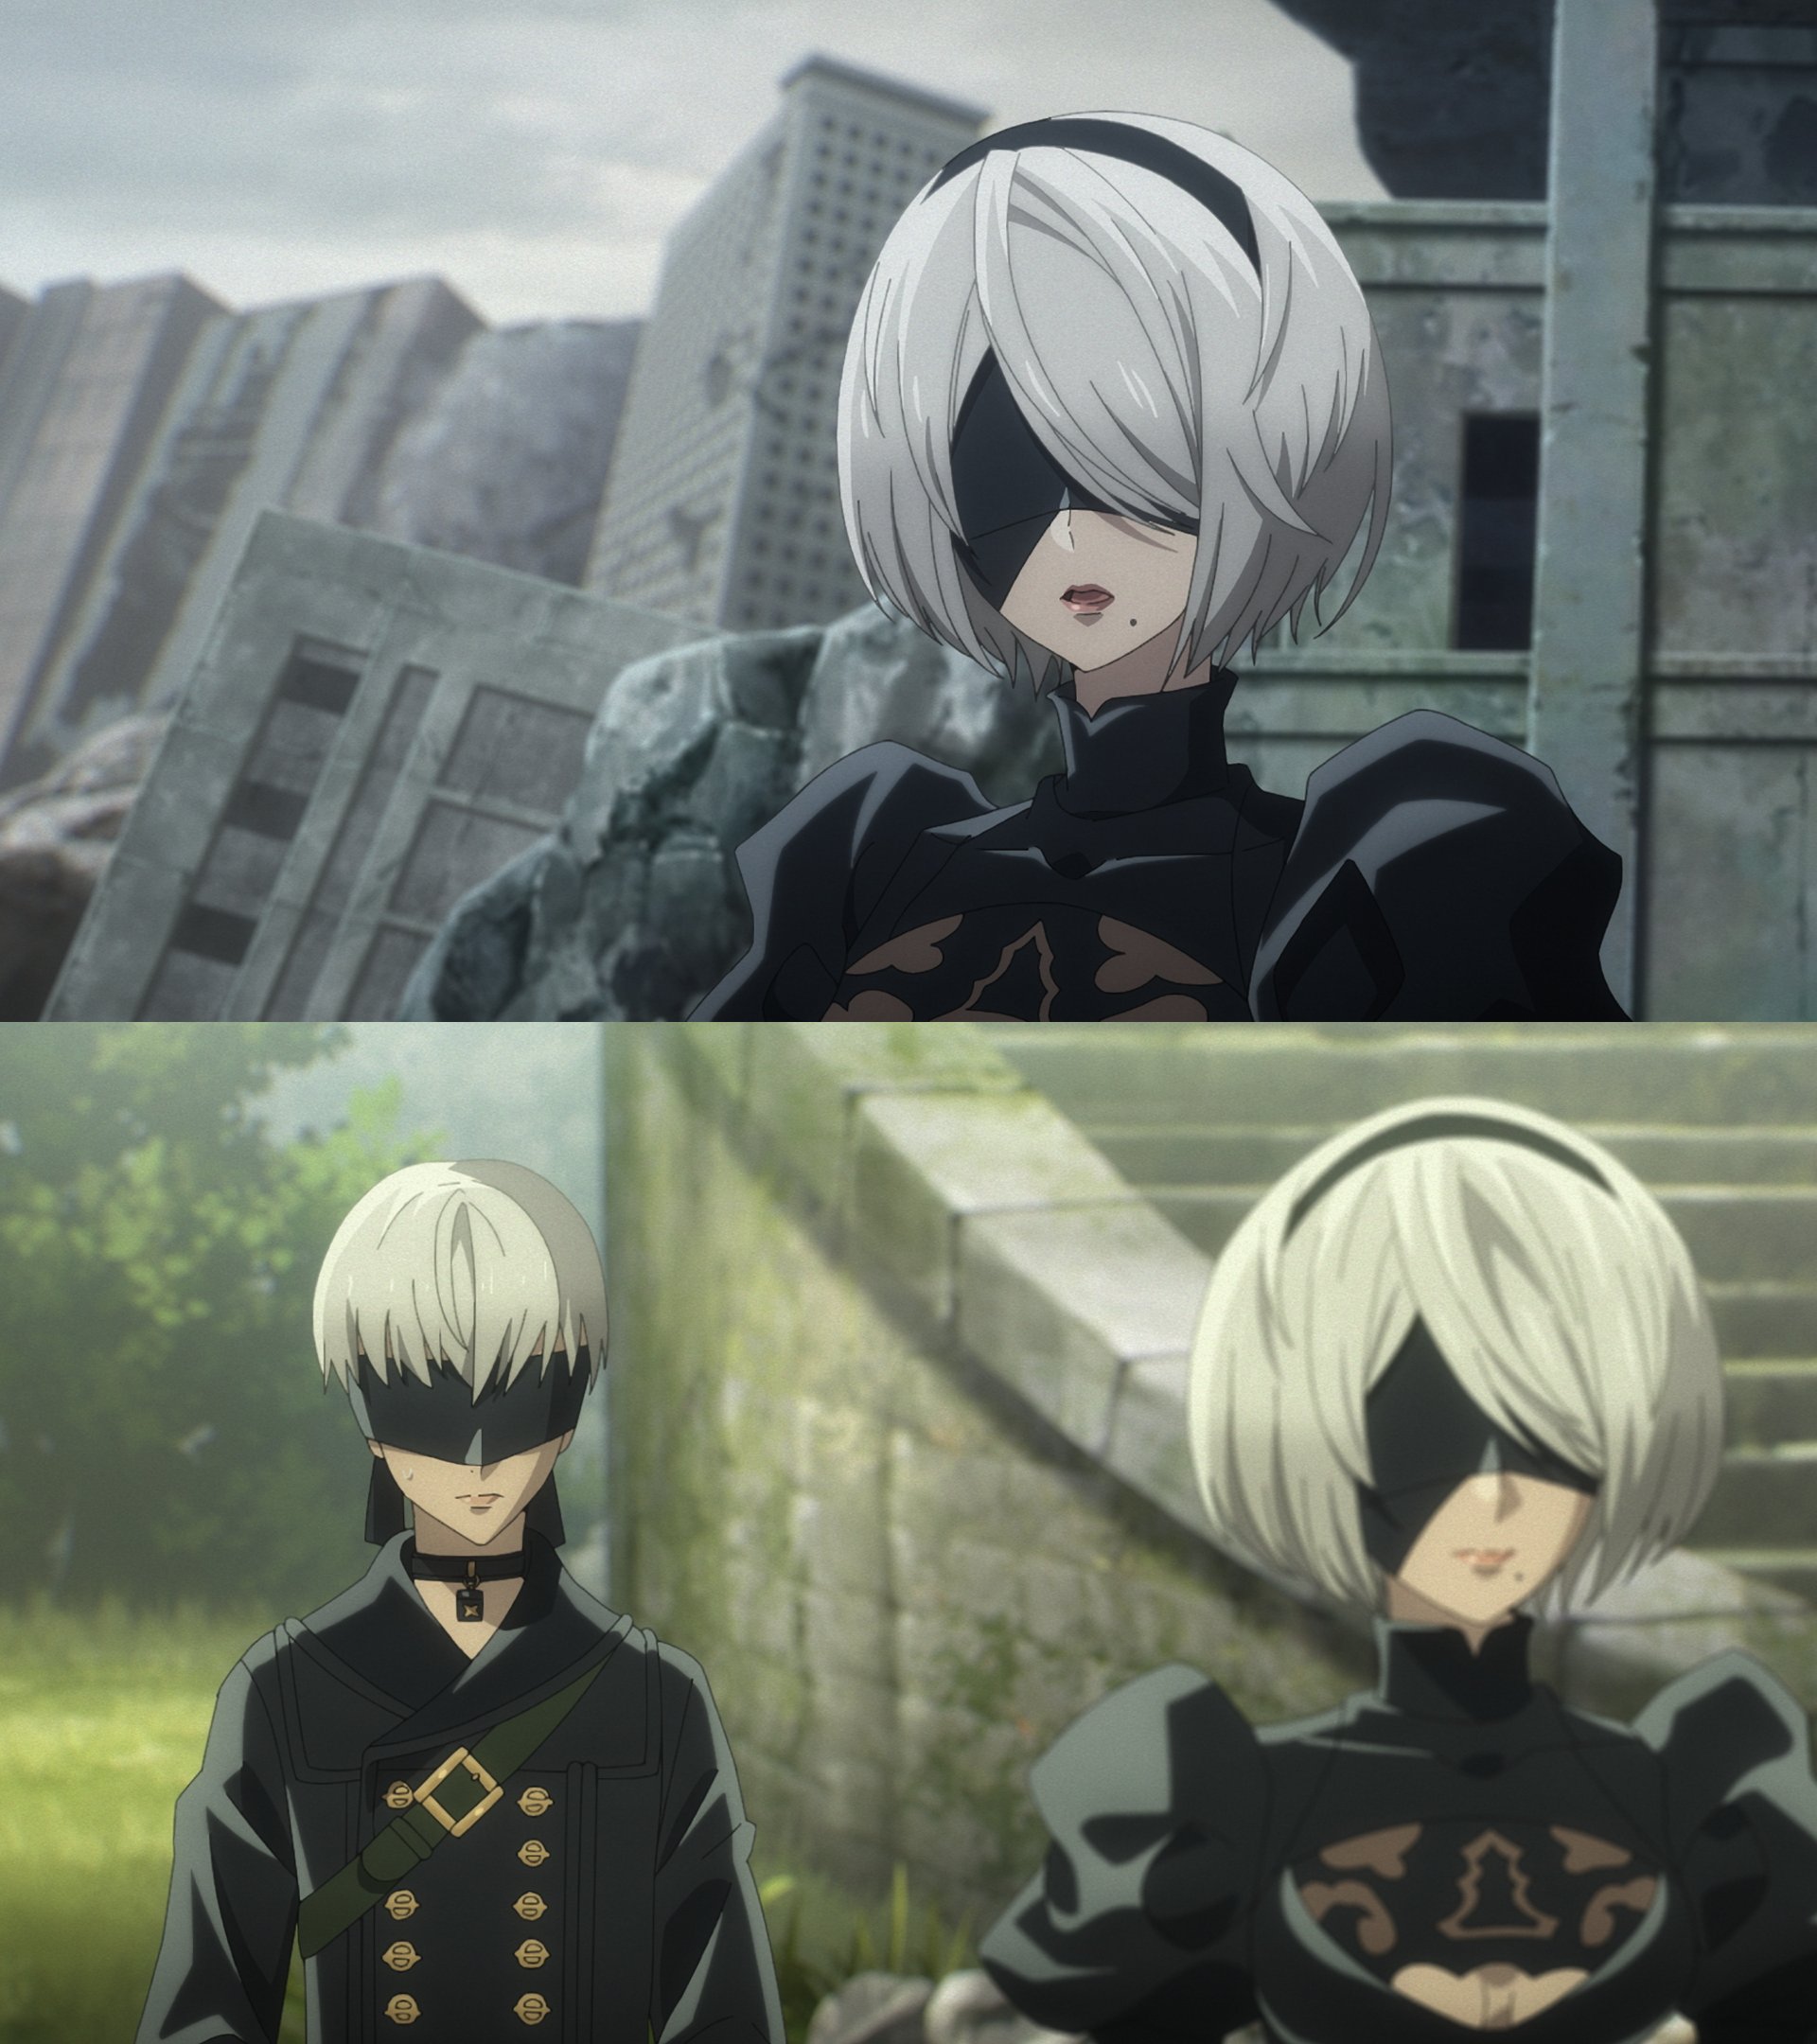 There will be a Nier: Automata Anime announcement tomorrow at